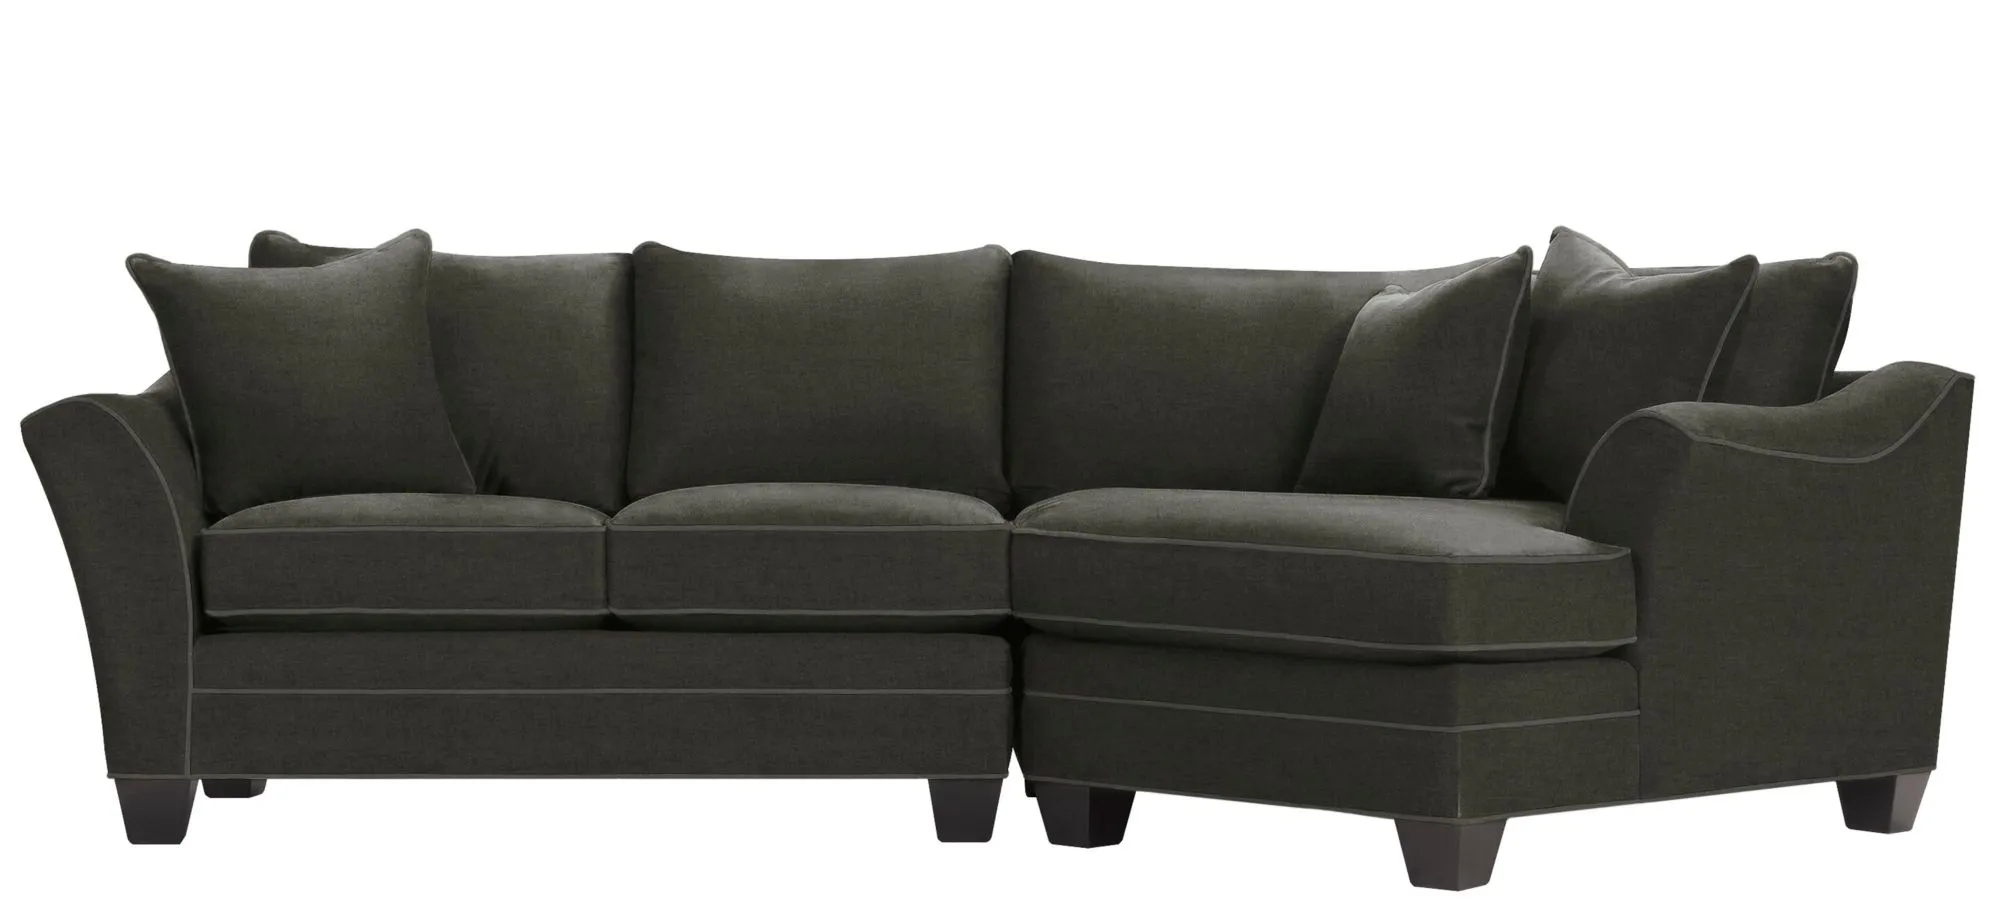 Foresthill 2-pc. Right Hand Cuddler Sectional Sofa in Santa Rosa Slate by H.M. Richards